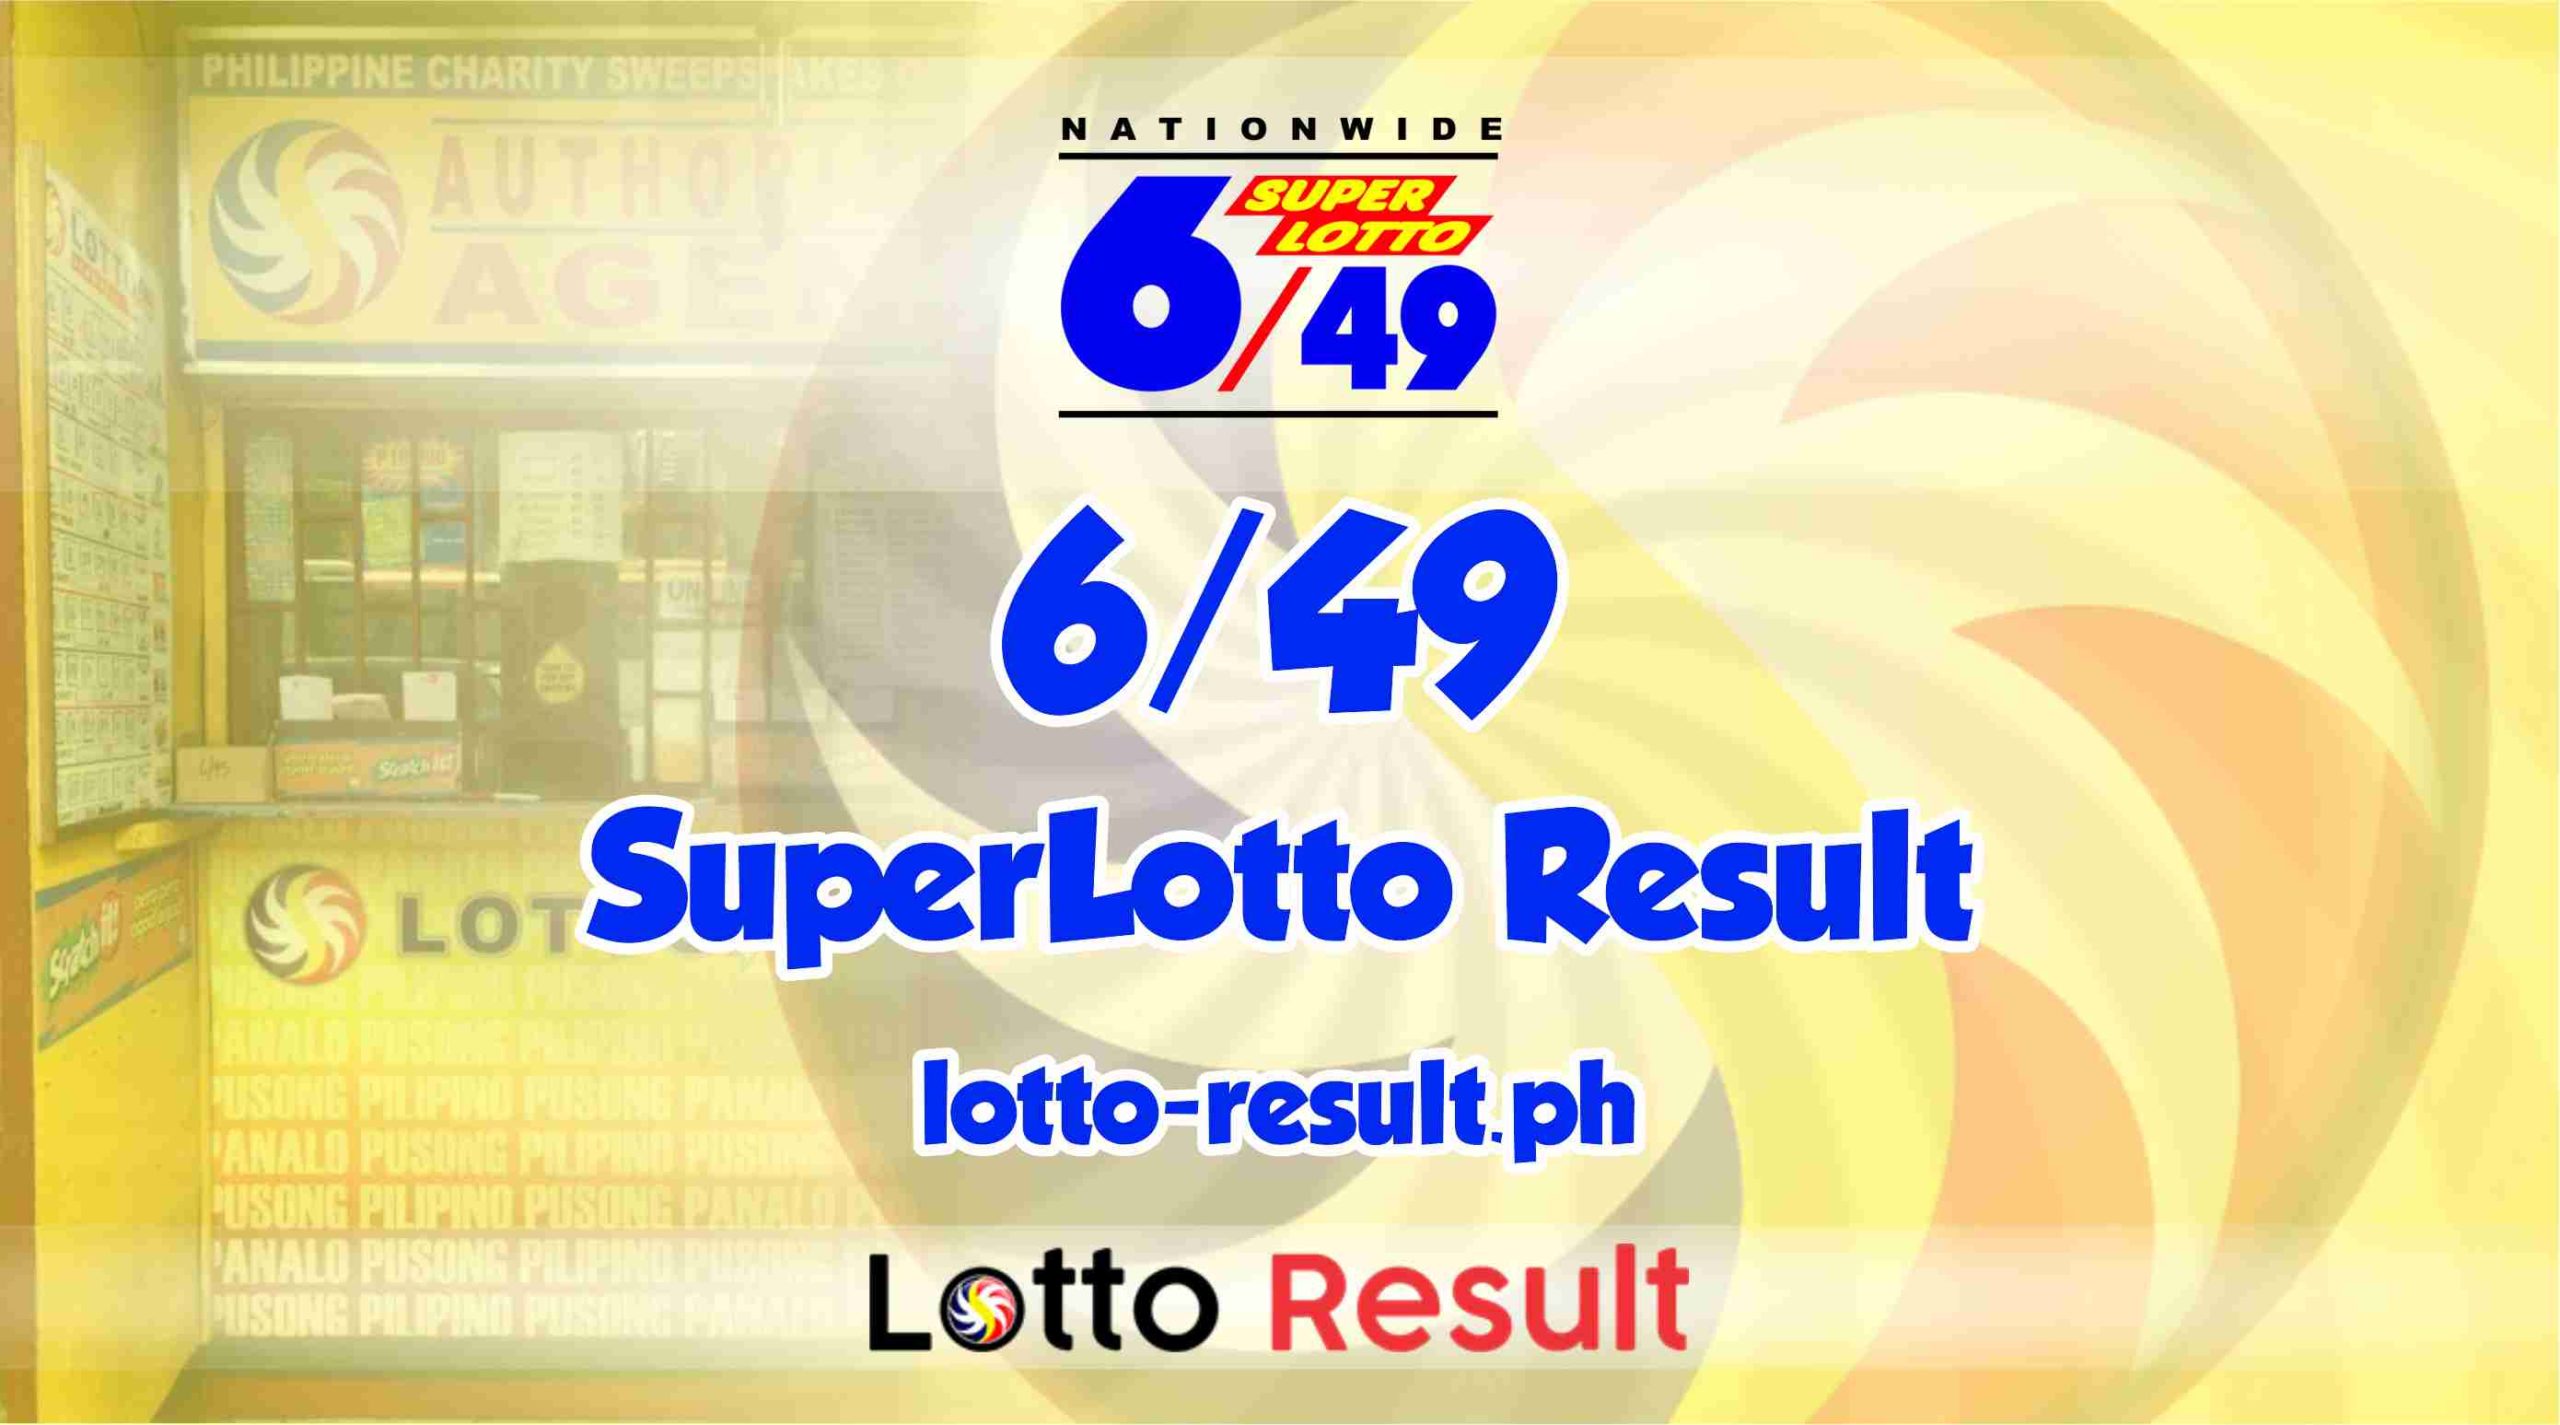 6/49 Lotto Result Official 6/49 Super Lotto Result